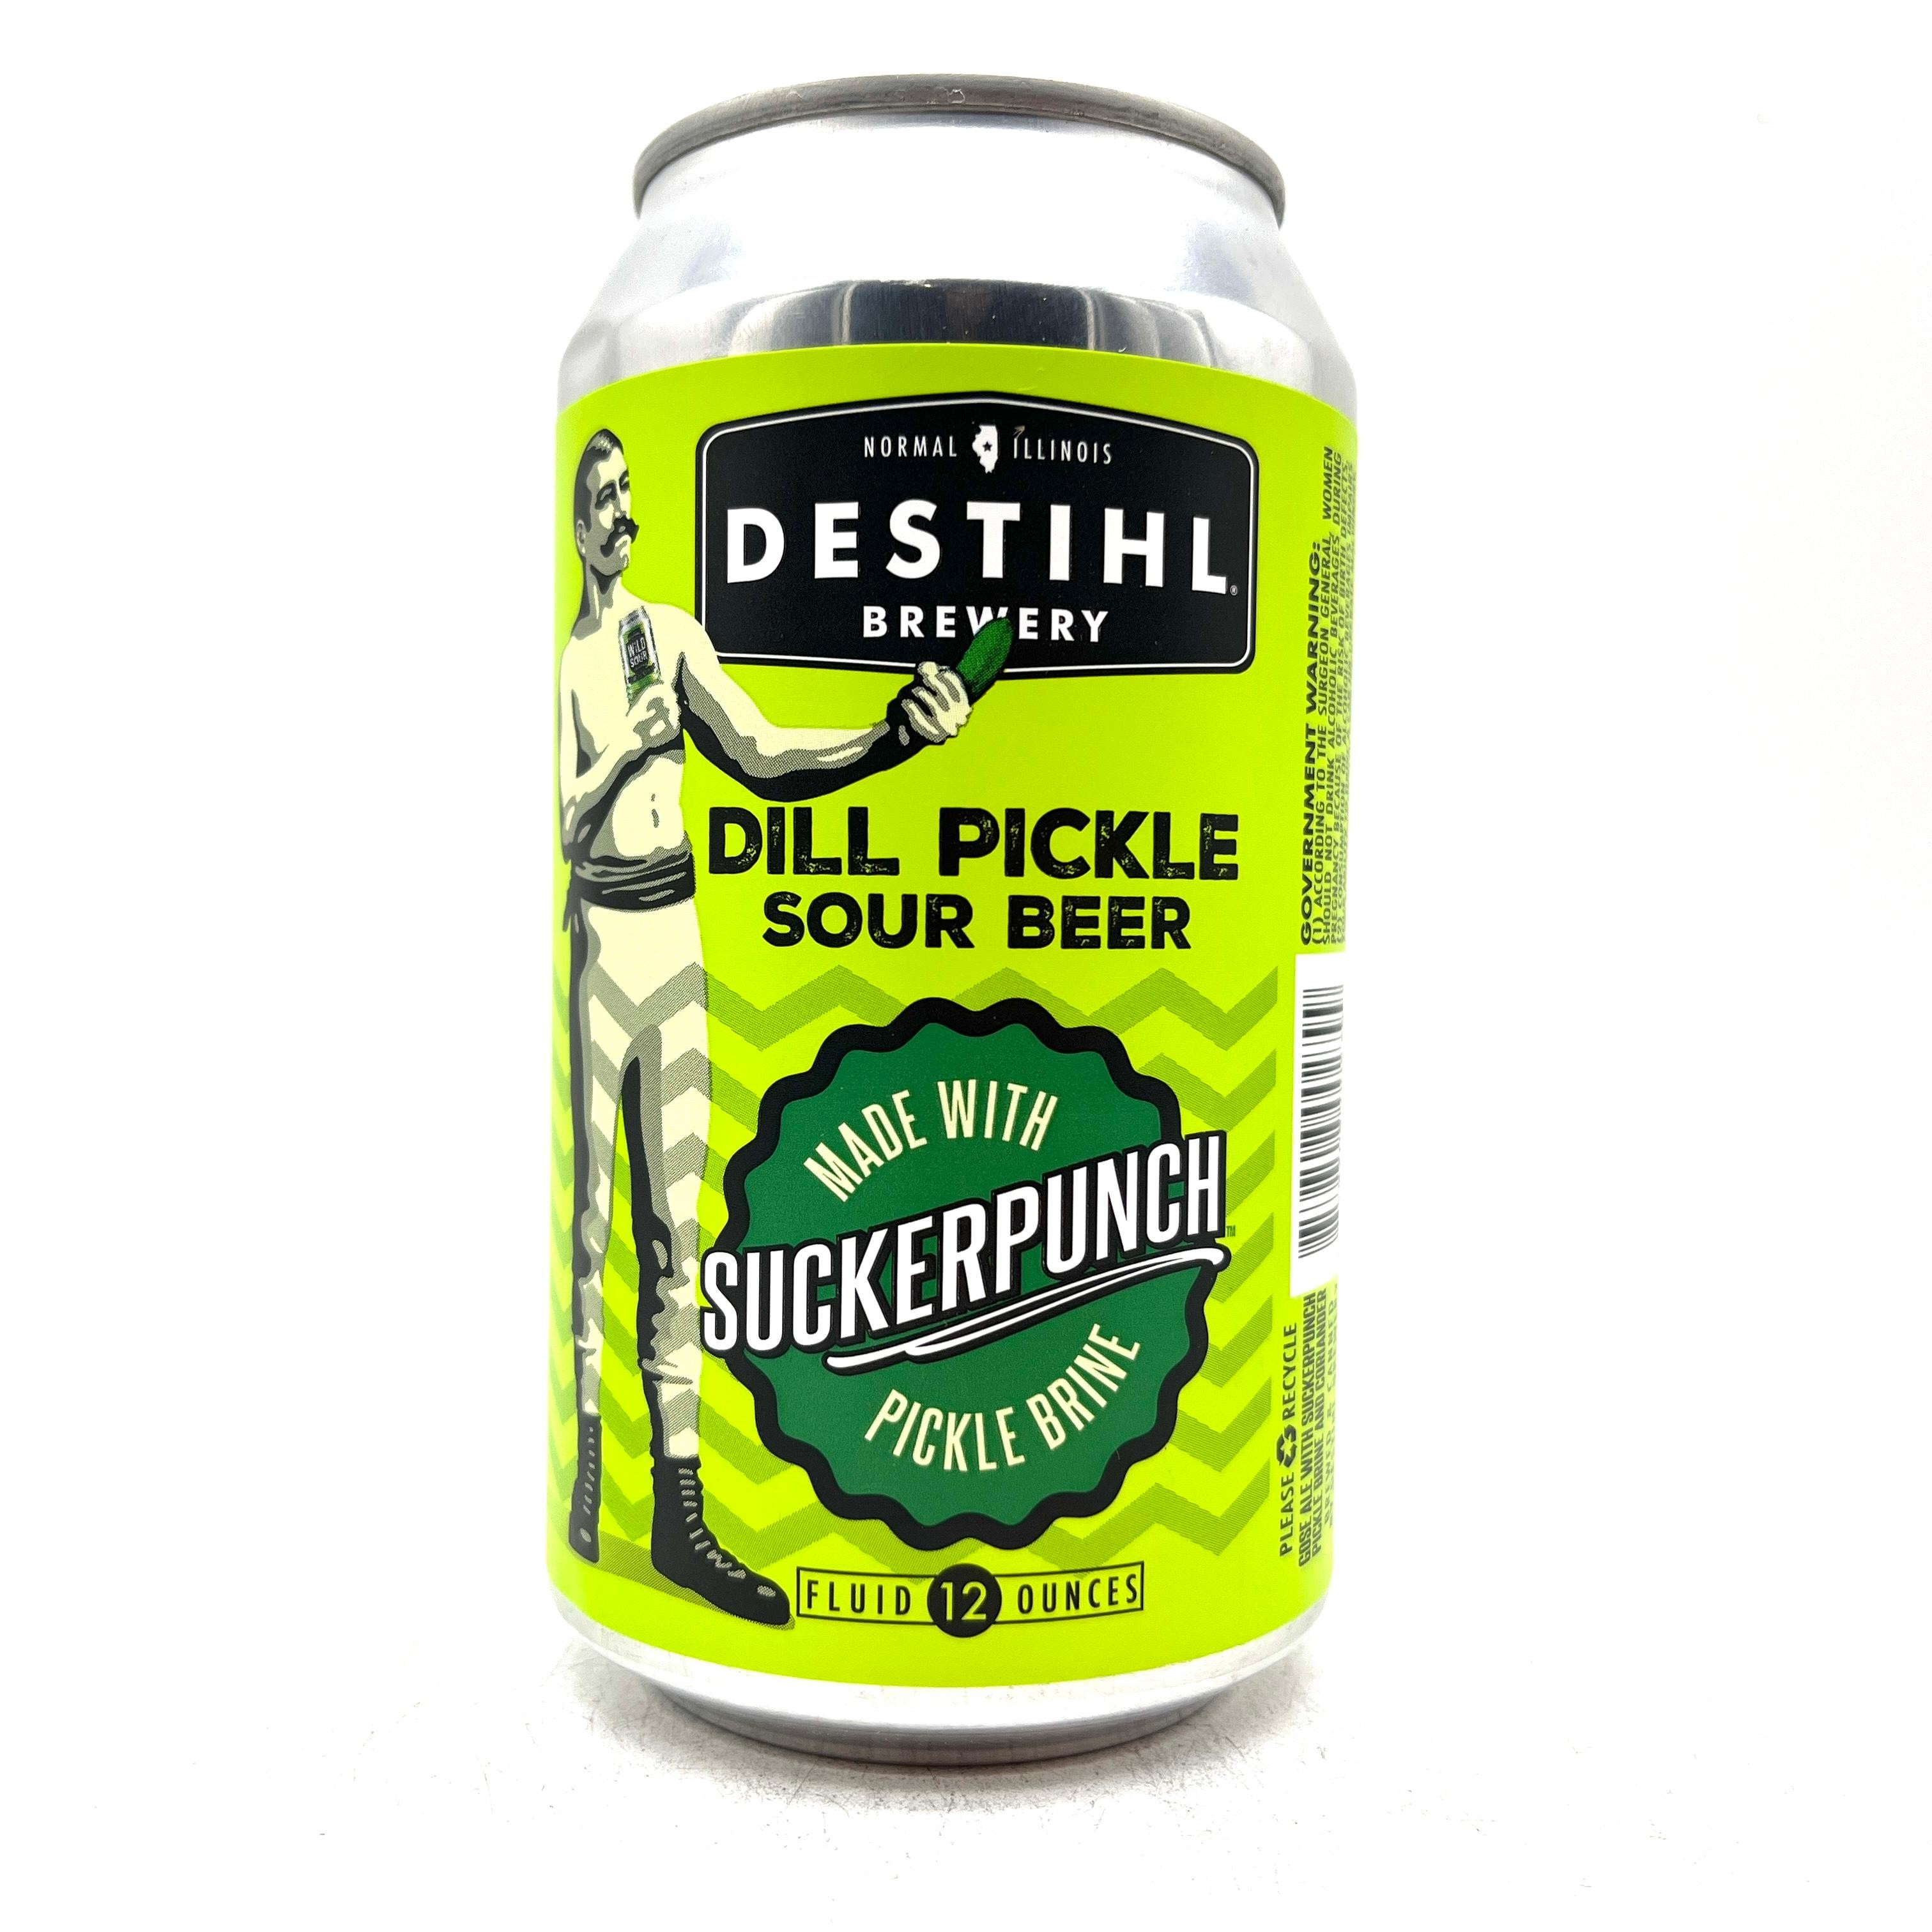 Destihl - Dill Pickle Sour Beer